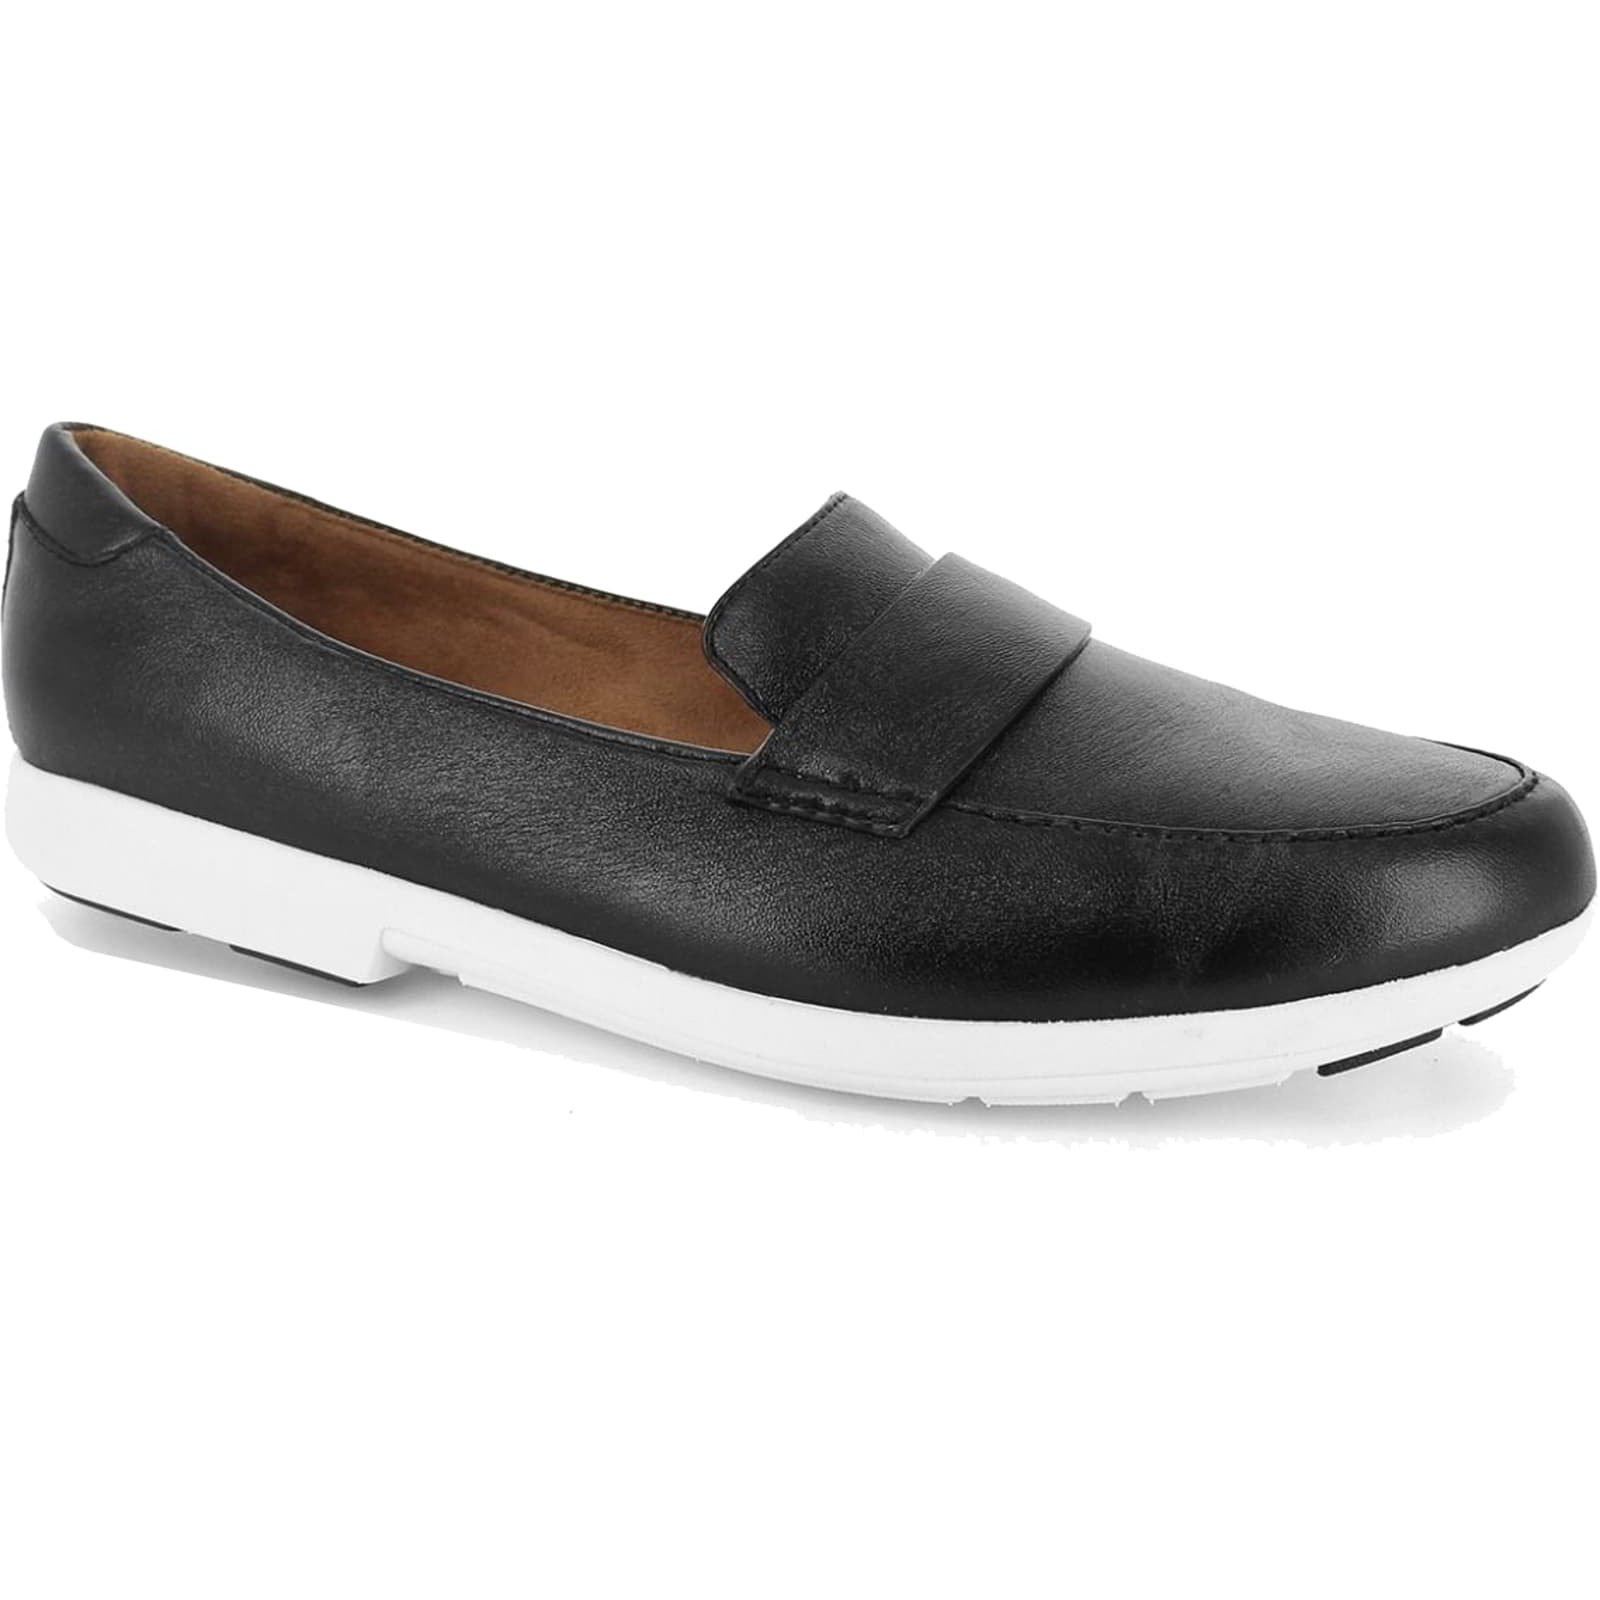 Strive Women's Milan Slip On Loafers Shoes - Black Leather - UK 5.5